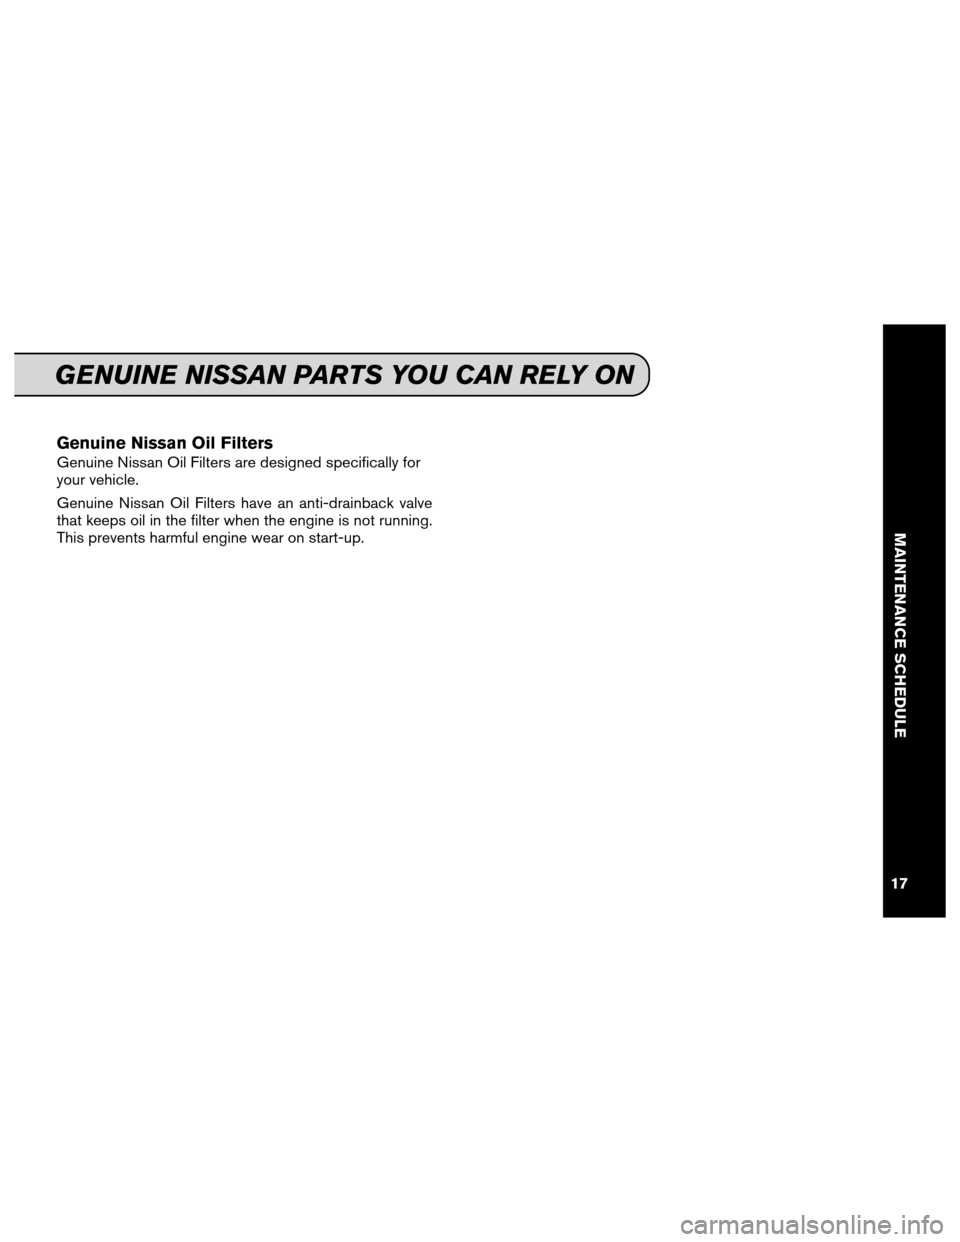 NISSAN XTERRA 2013 N50 / 2.G Service And Maintenance Guide Genuine Nissan Oil Filters
Genuine Nissan Oil Filters are designed specifically for
your vehicle.
Genuine Nissan Oil Filters have an anti-drainback valve
that keeps oil in the filter when the engine i